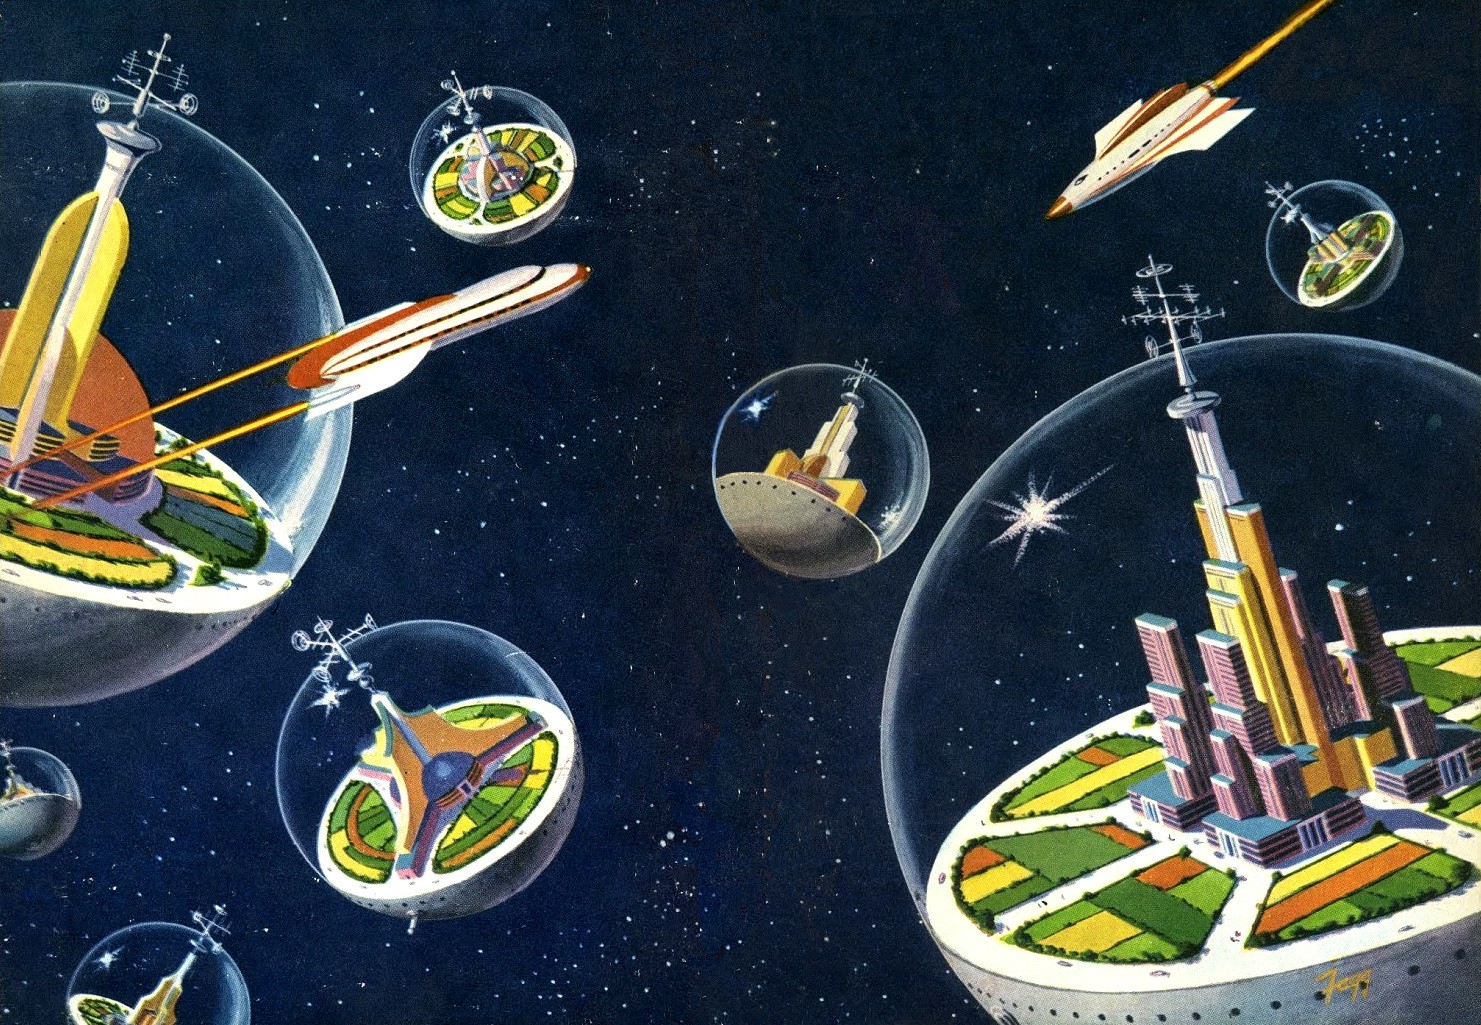 retro space wallpaper,spacecraft,space station,space,vehicle,illustration